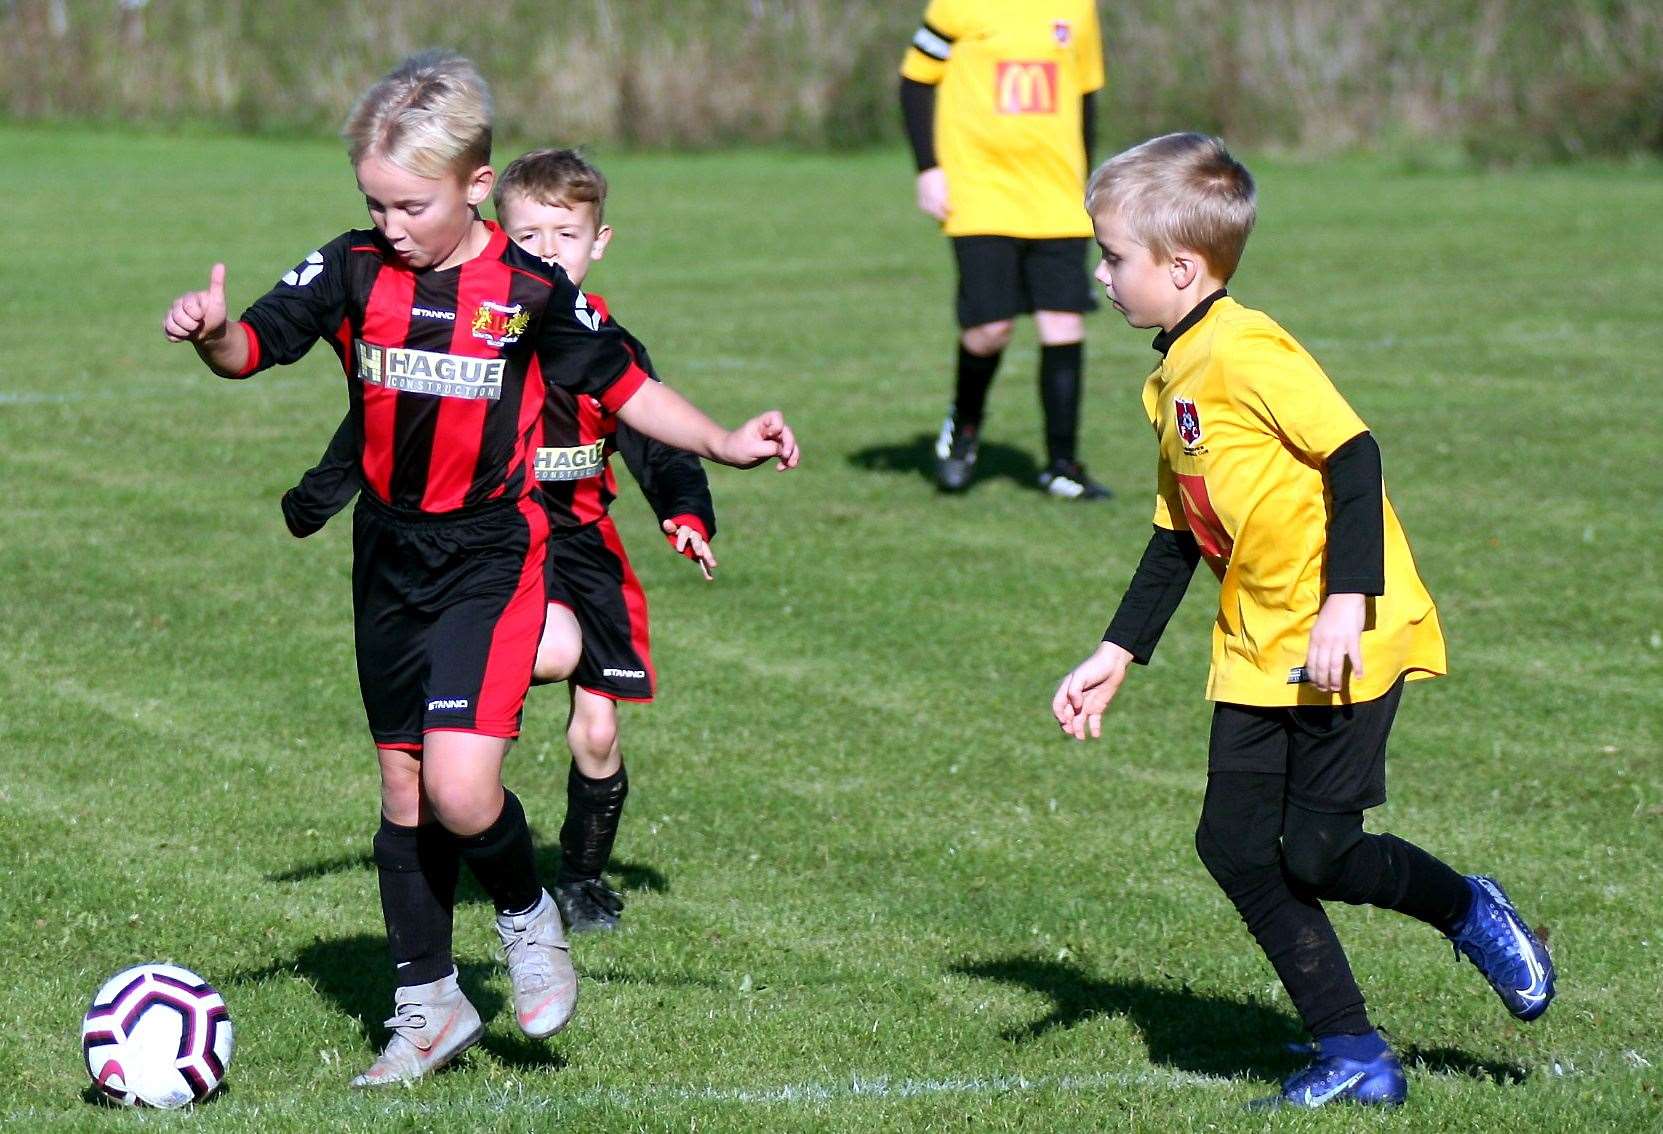 Woodcoombe Youth's under-9s (red/black) battle Thamesview Rangers under-9s Picture: Phil Lee